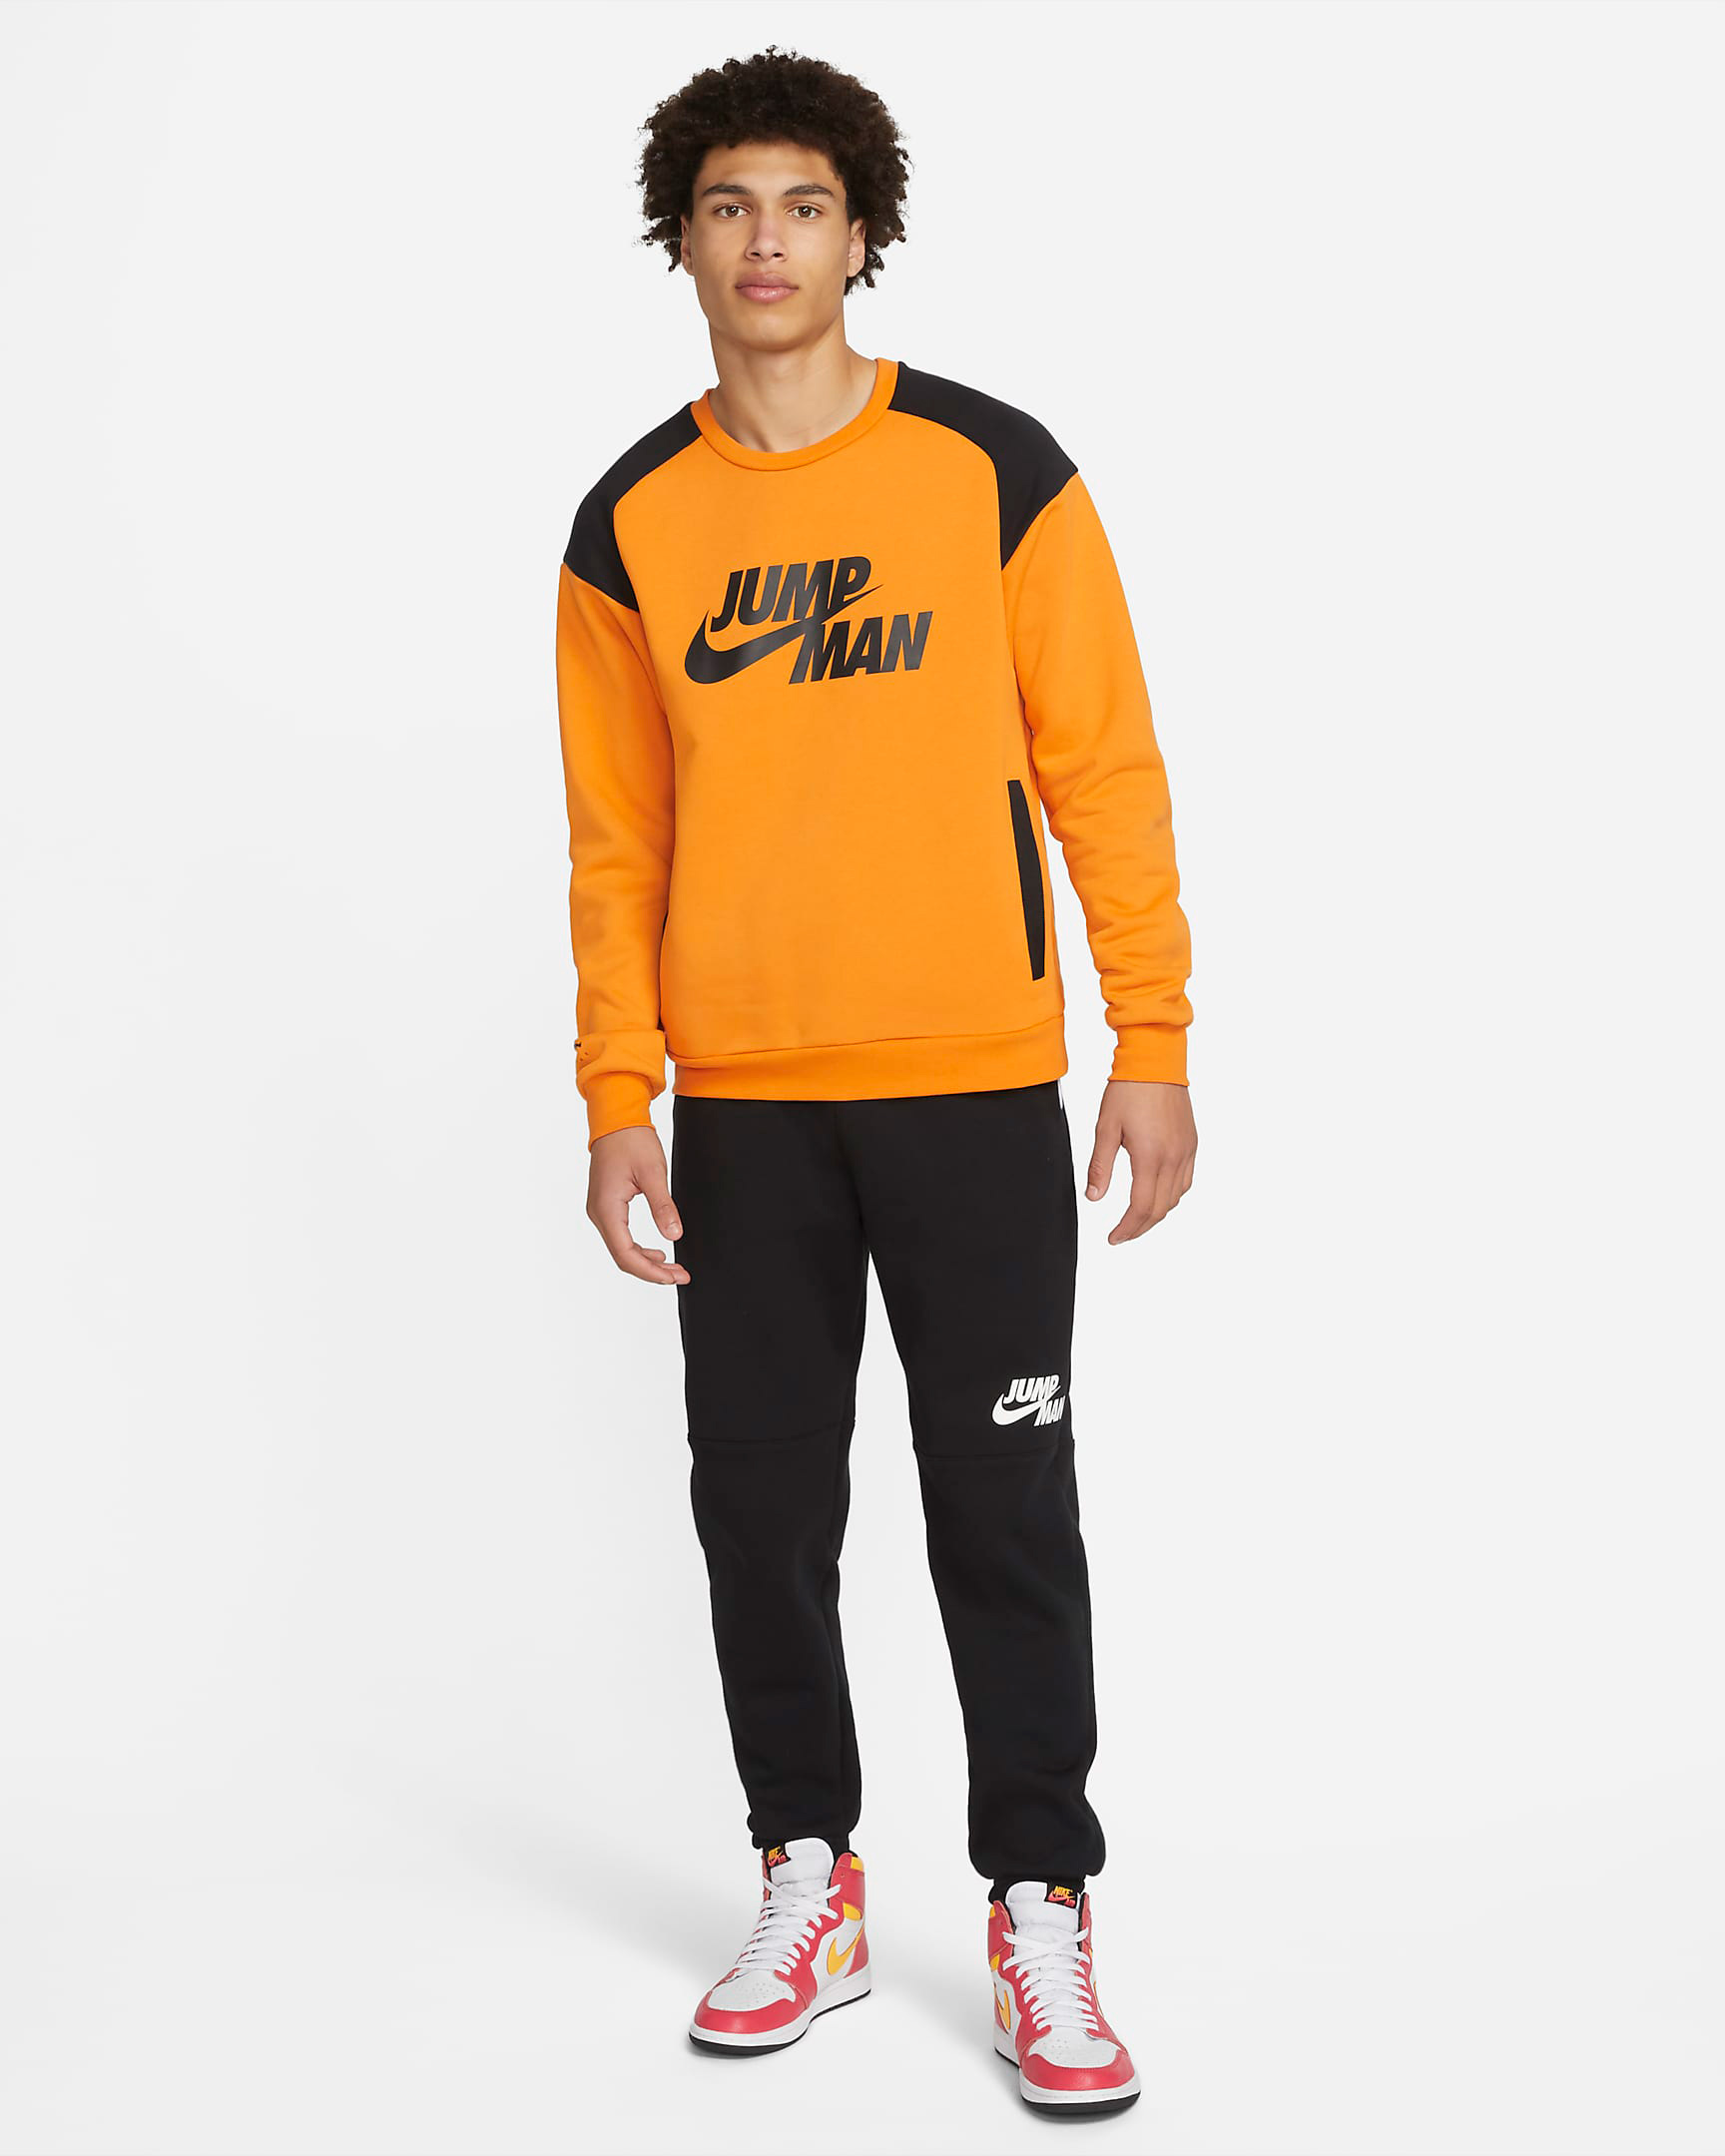 jordan-light-curry-sneaker-clothing-outfit-3